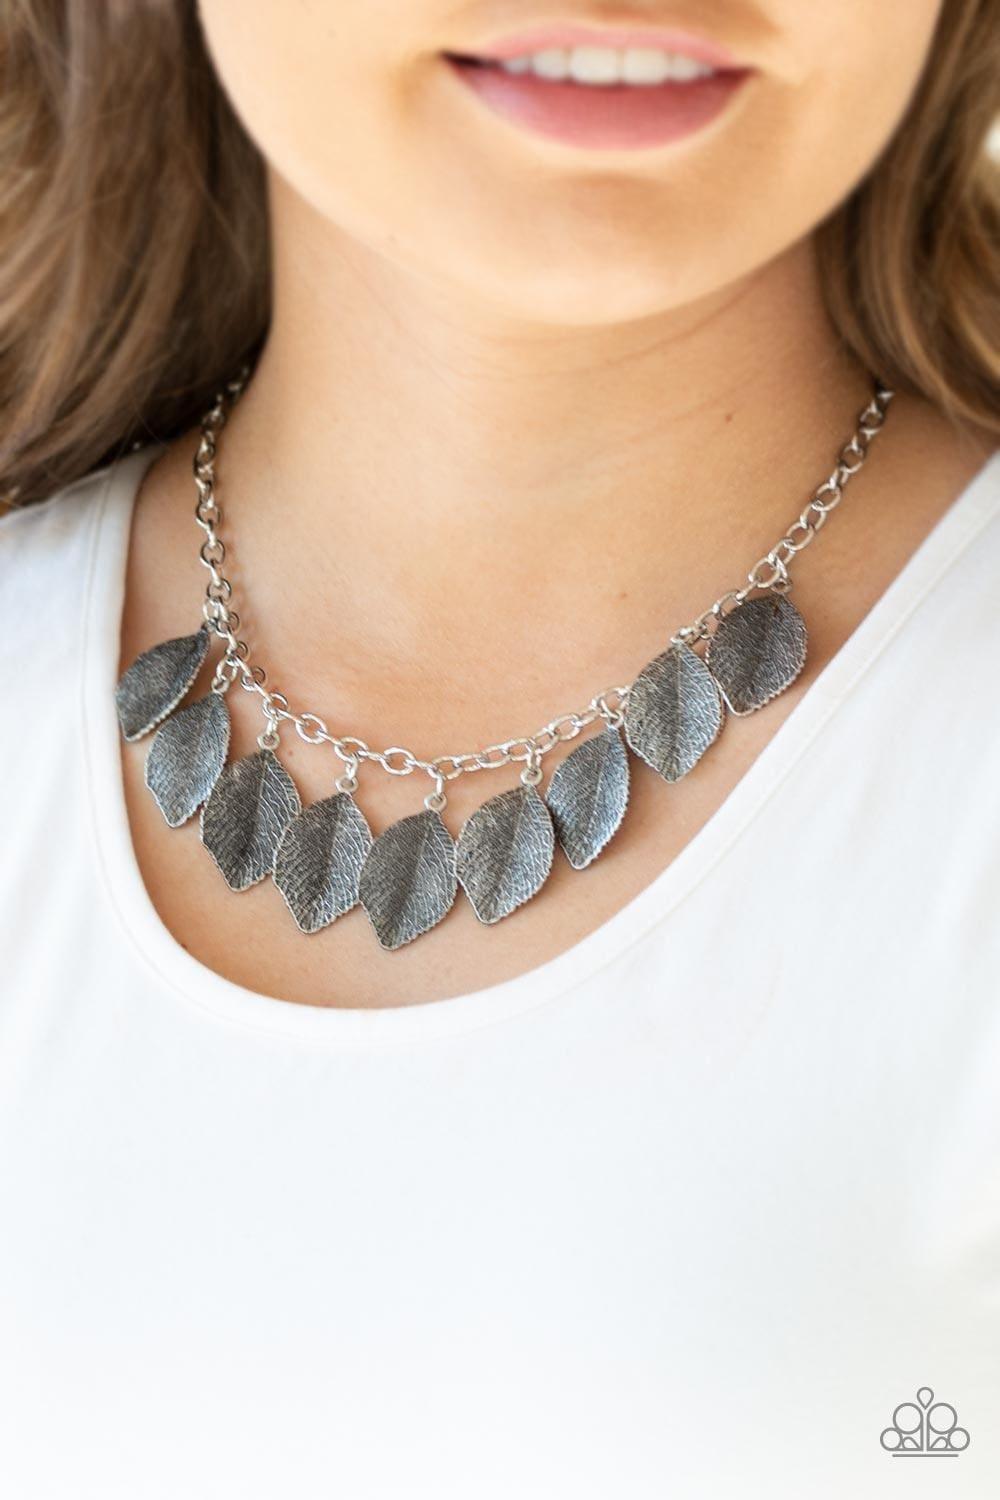 Paparazzi Accessories - A True Be-leaf-er - Silver Necklace - Bling by JessieK